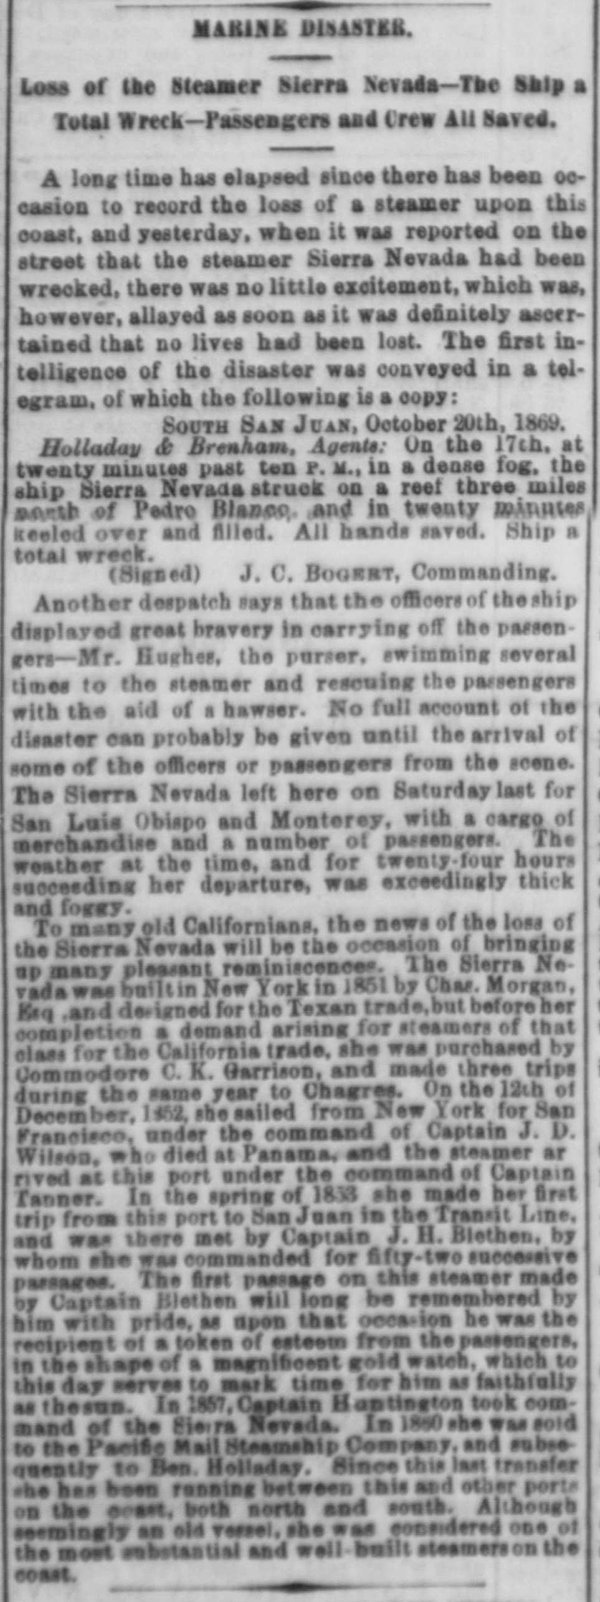 Newspaper clipping from Daily Alta California San Francisco 21OCT1869 of Sierra Nevada shipwreck